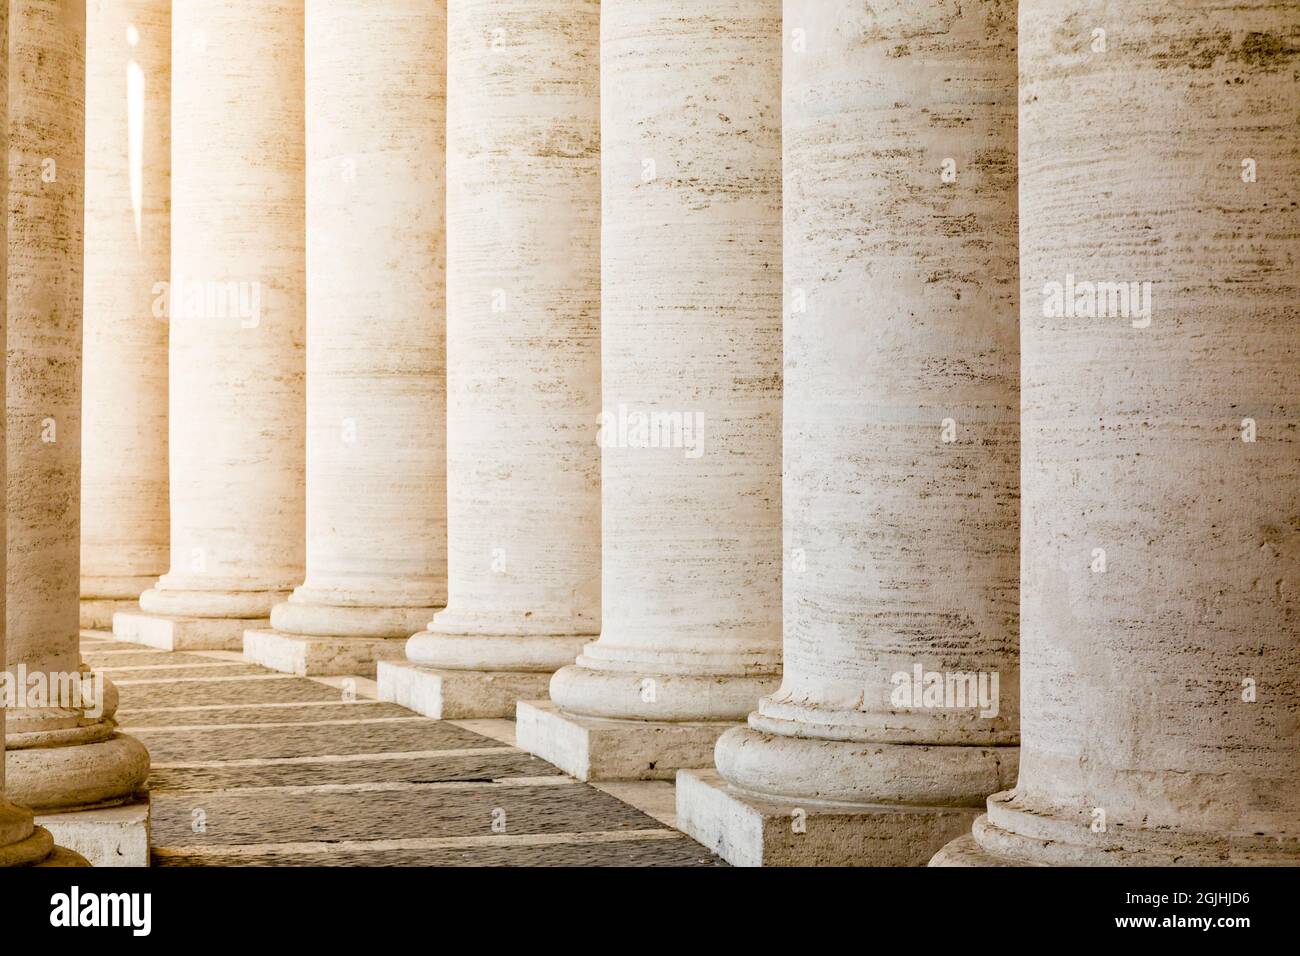 Columns at St Peters Basilica, Rome, Italy Stock Photo